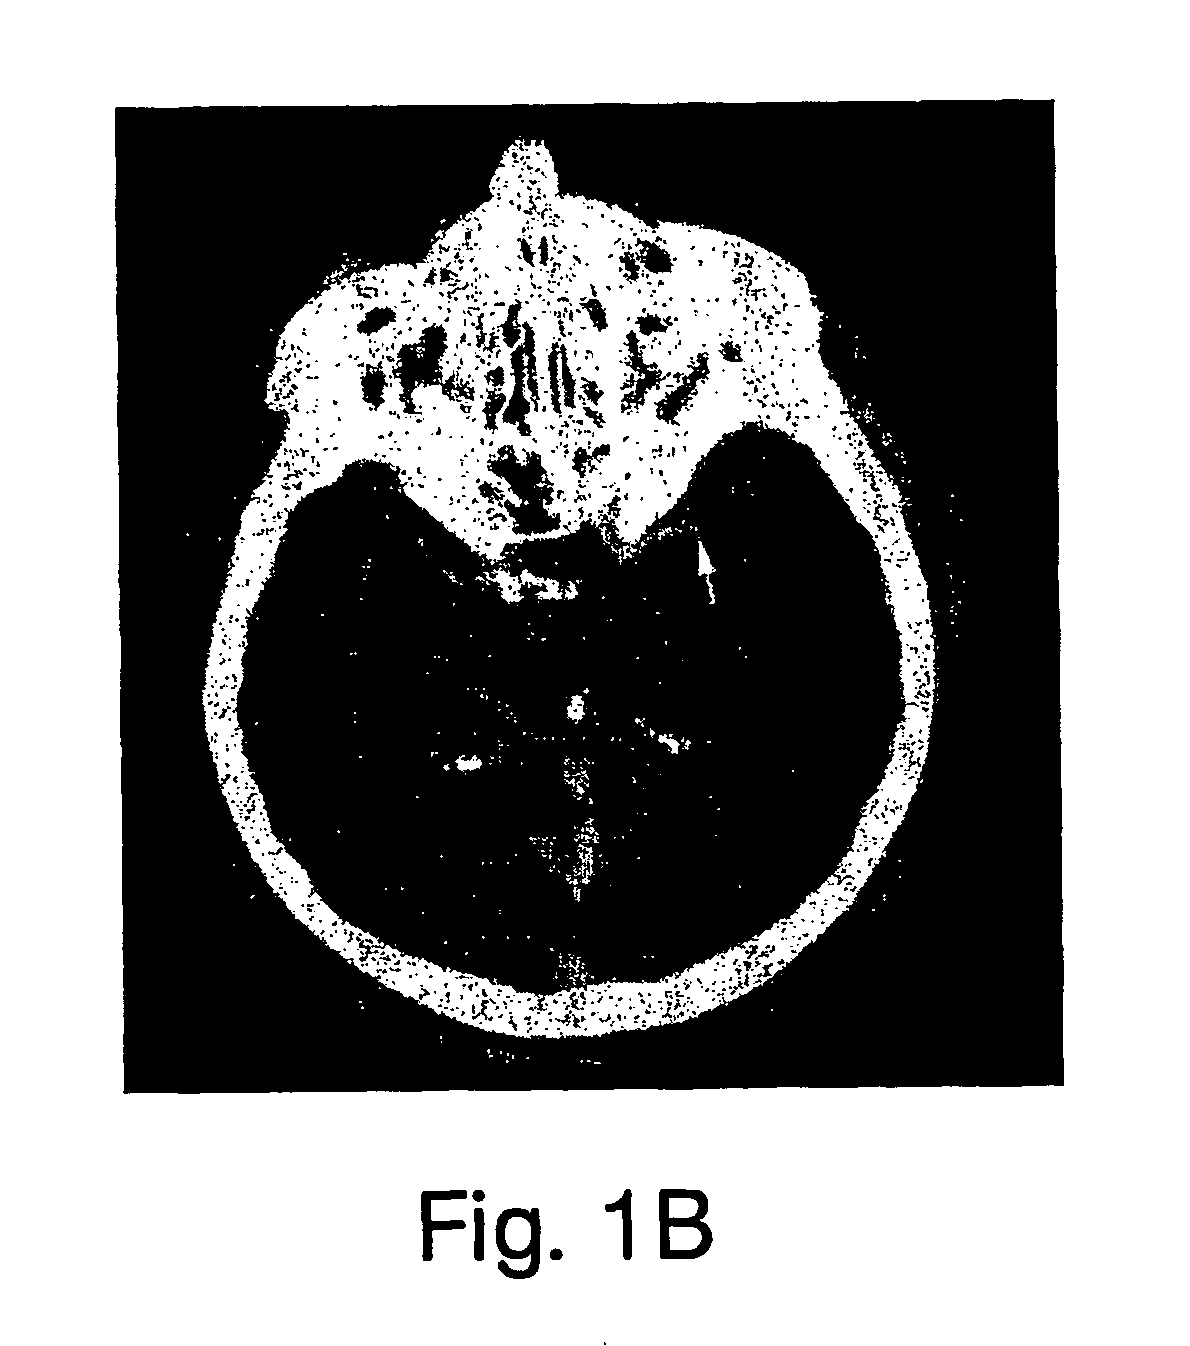 Method and apparatus for creating penumbra and infarct images